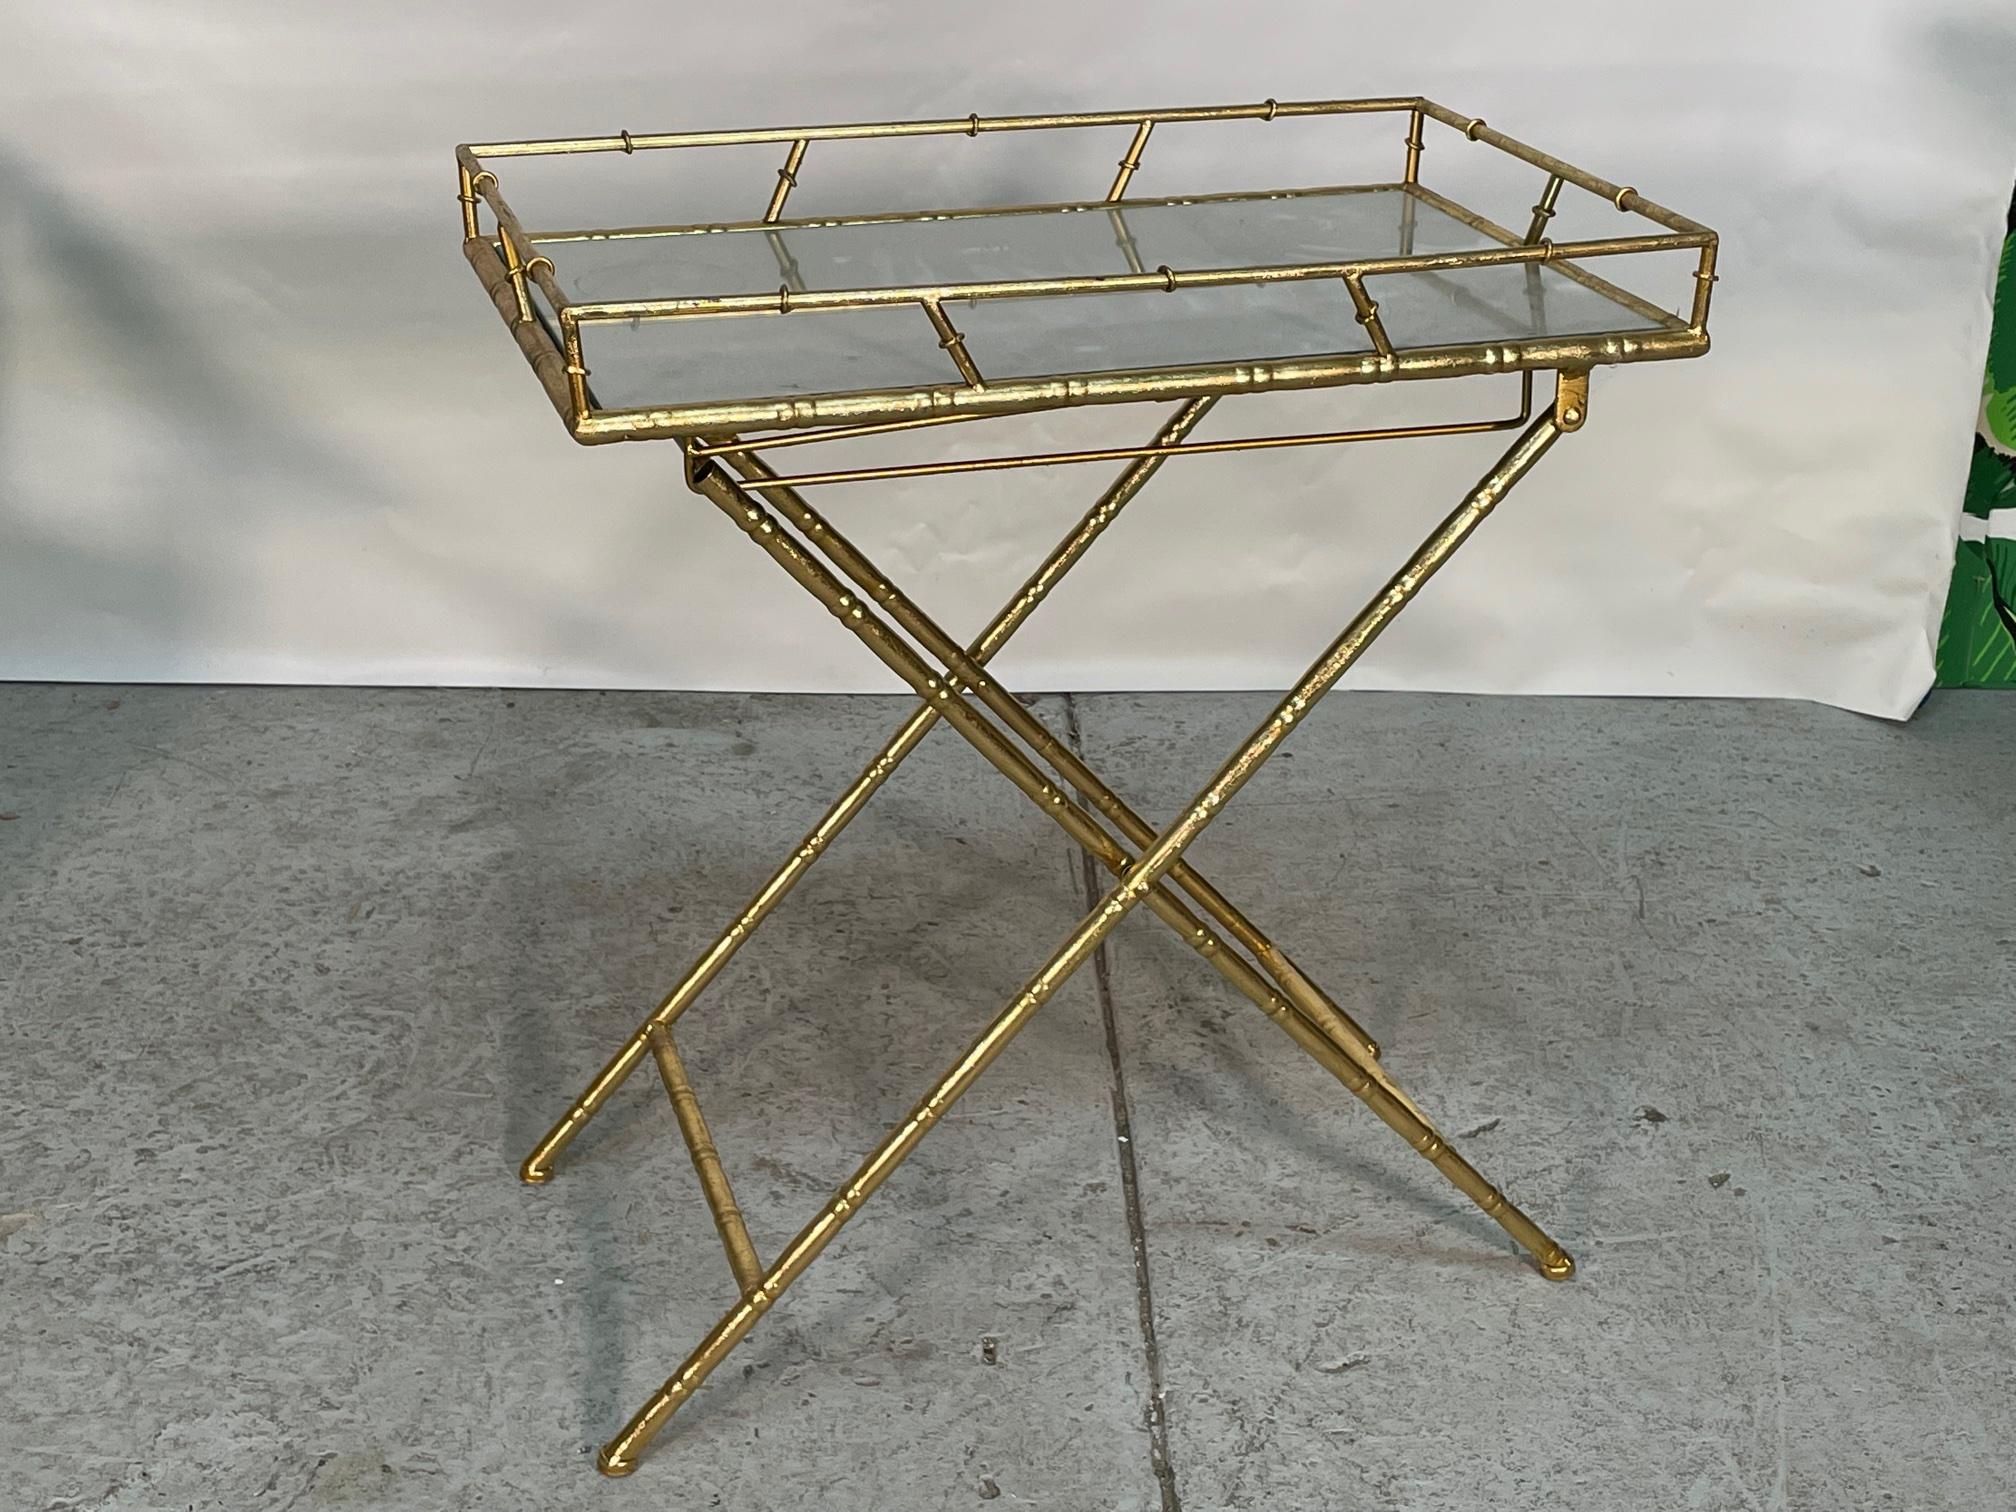 Gold metal serving tray features faux bamboo detailing and a mirrored top. Folds easily for storage. Very good condition with only very minor imperfections consistent with age.
Measures 24